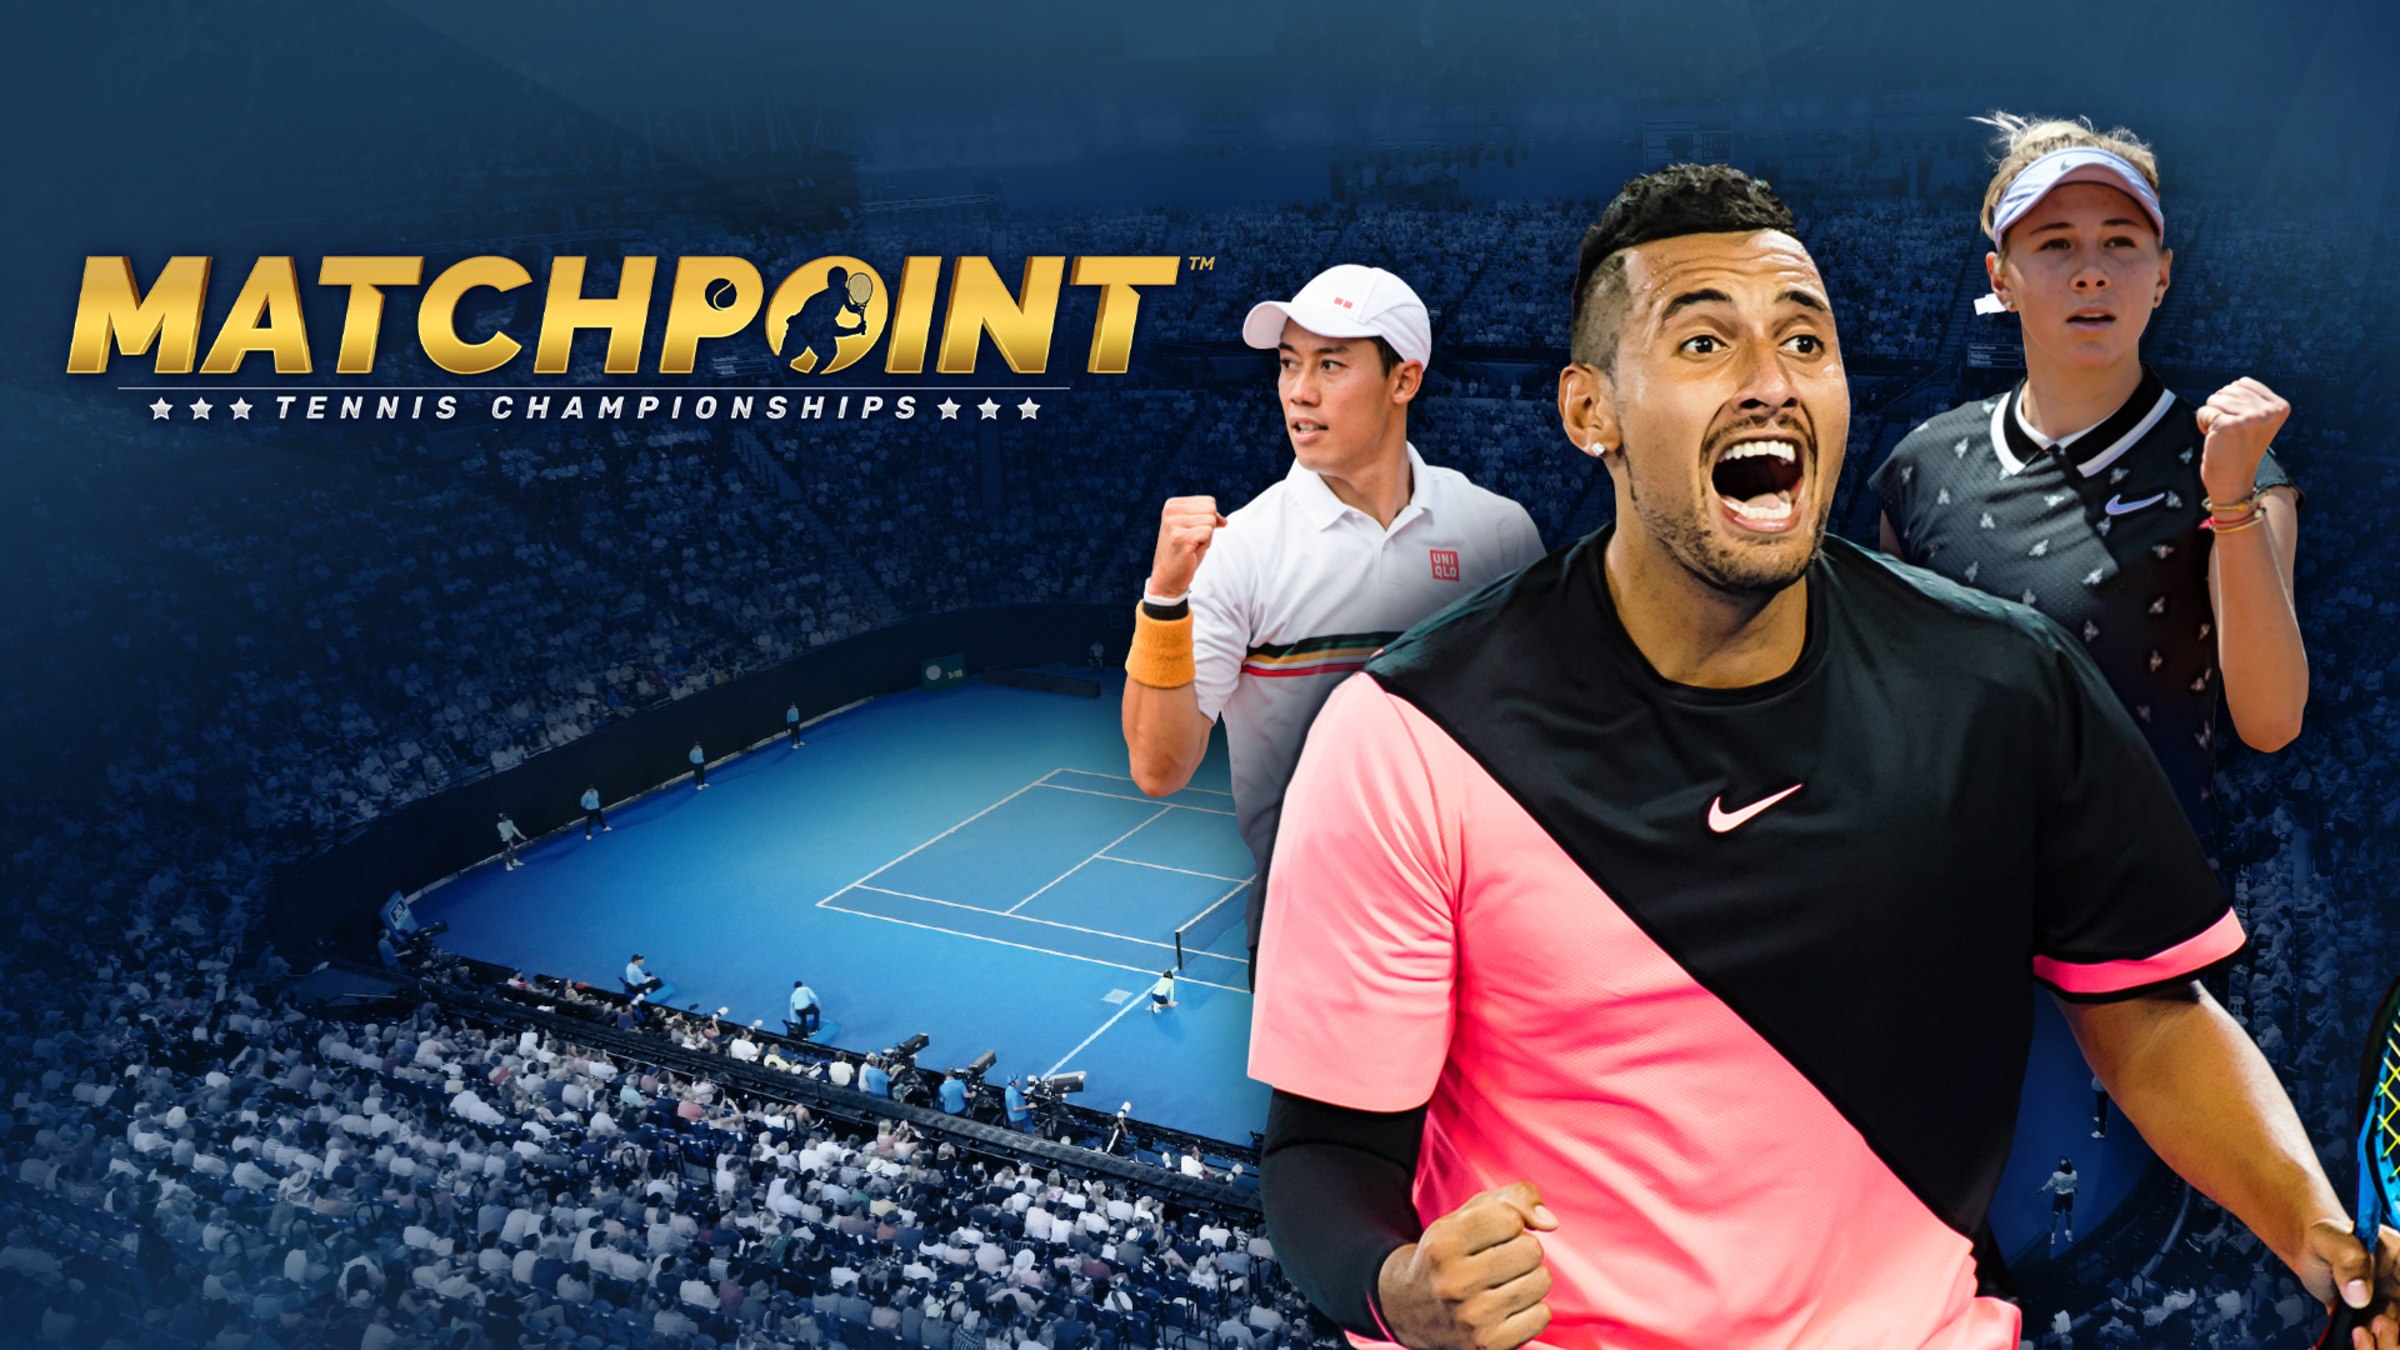 Matchpoint - Tennis Championships for Nintendo Switch - Nintendo Official  Site